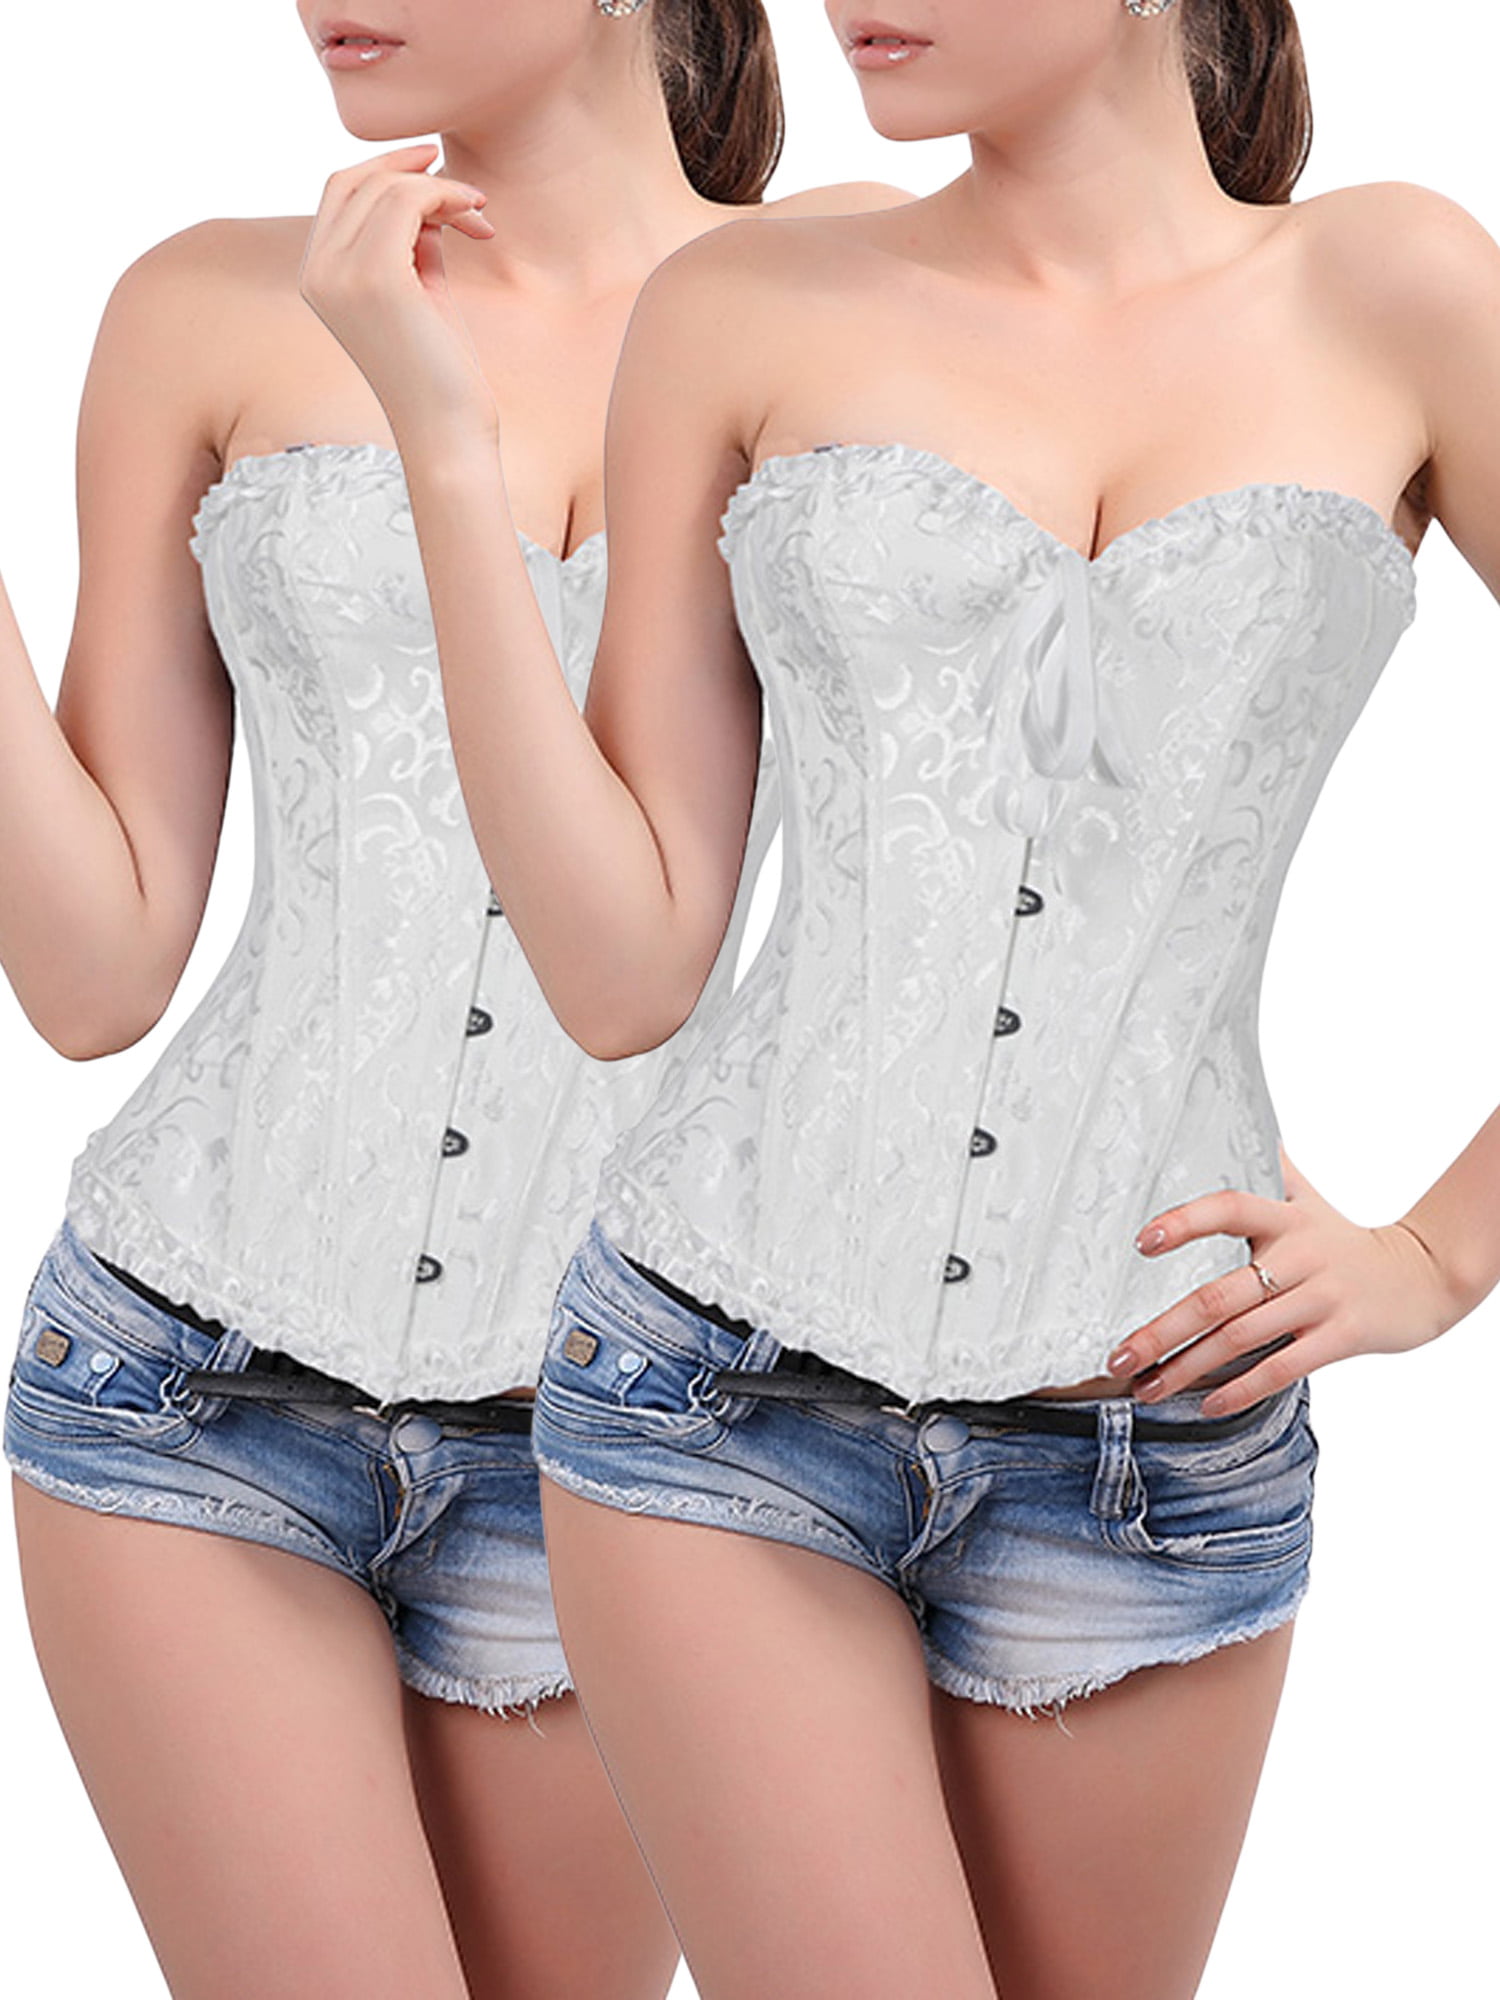 DODOING 2 Packs Women's Satin Lace Overbust Plus Size Tummy Control Slimmer Body Shaper Corsets Bustier Top Corselet + G-string - Walmart.com